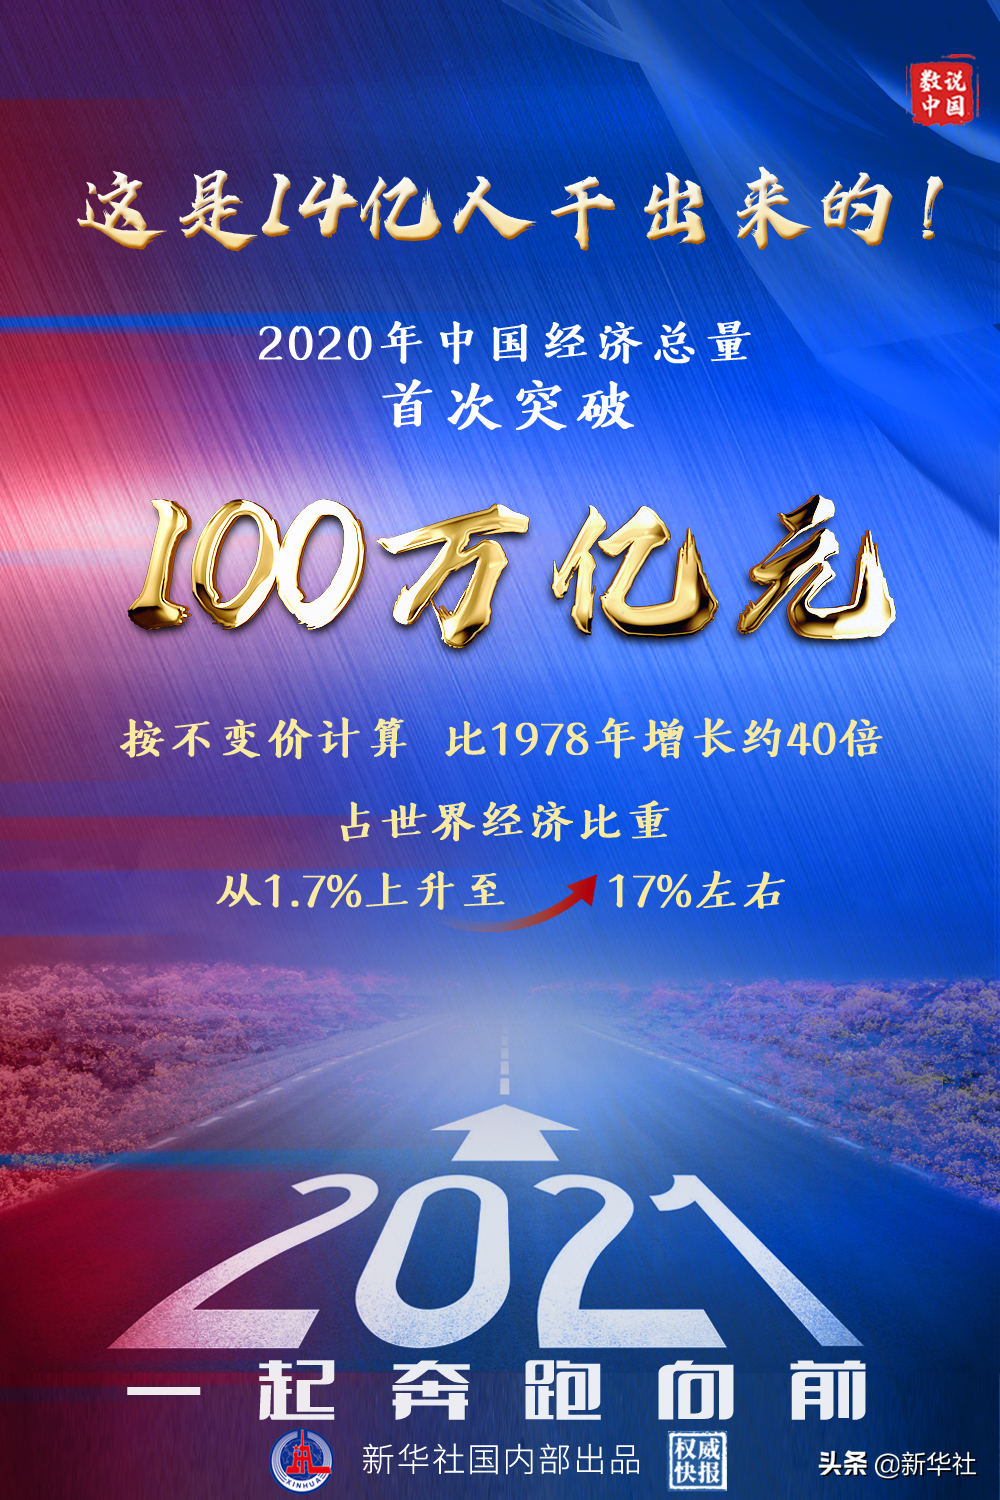 Our country GDP grew 2.3% compared to the same period 2020, first exceed 100 trillion yuan